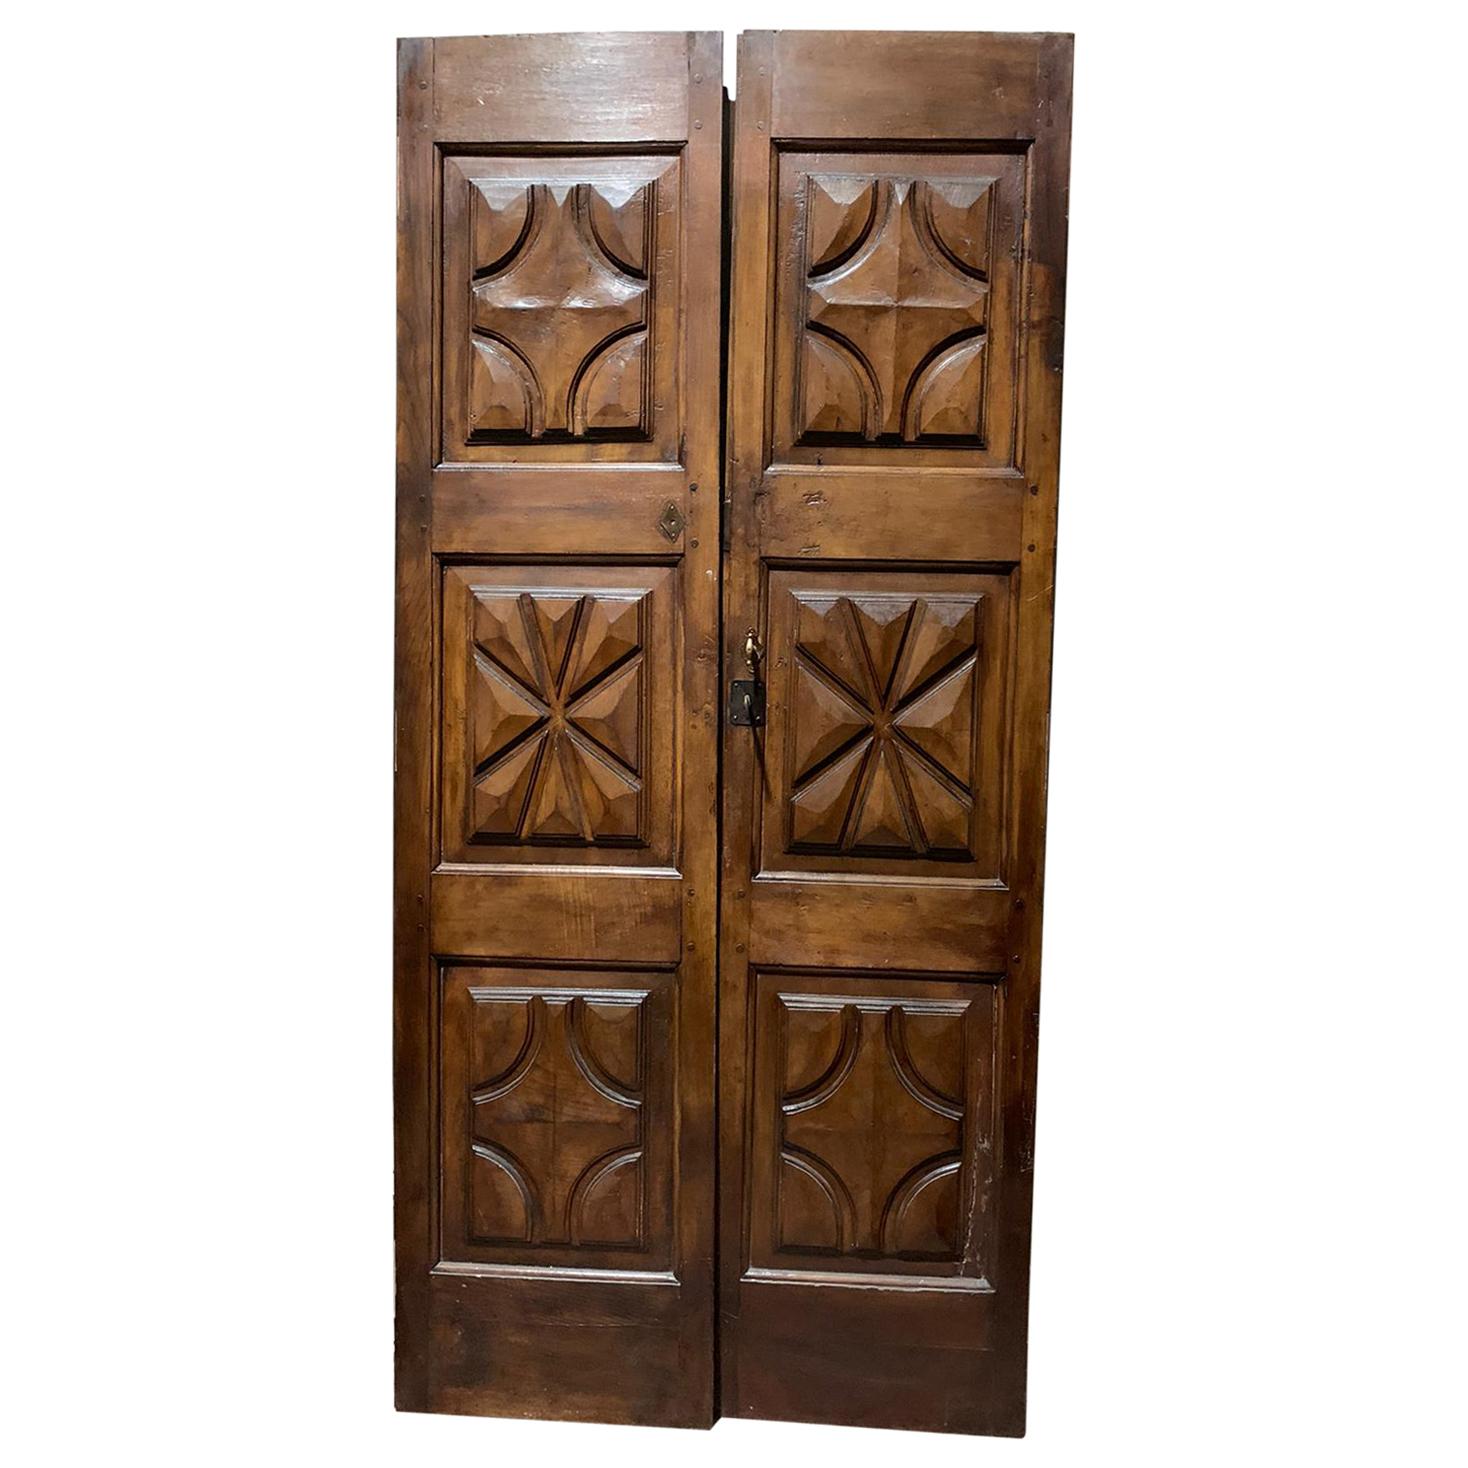 Antique Double Door Carved in Brown Walnut, Diamonds and Stars, Italy '600